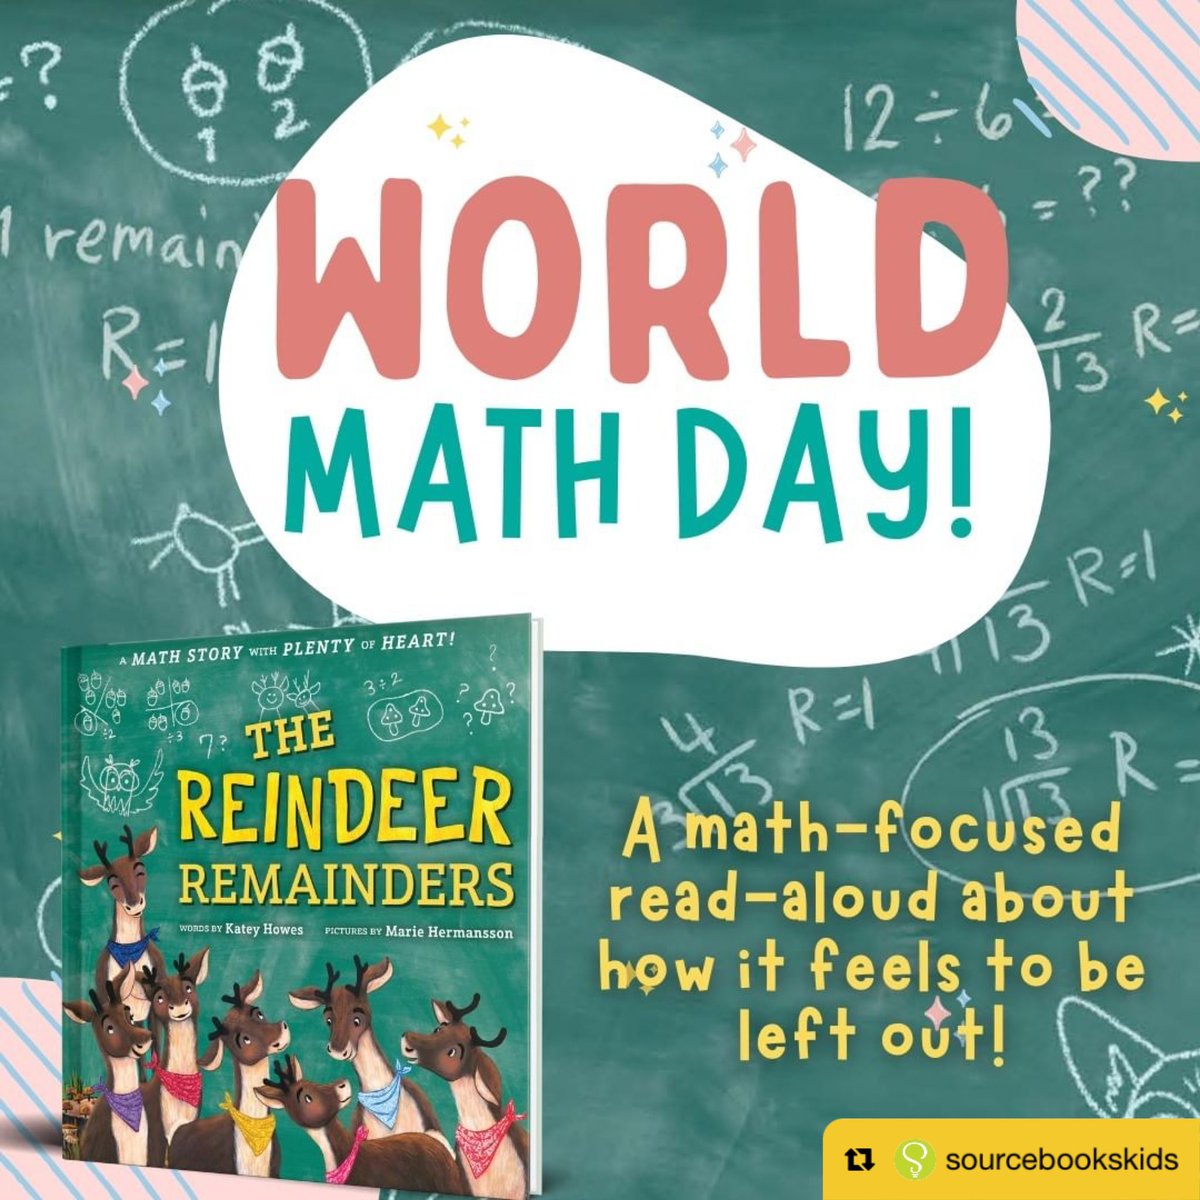 THE REINDEER REMAINDERS by @Kateywrites @MarieHermansson is an en-DEER-ing readaloud tackling division, prime numbers & remainders. Bring #math to storytime as woodland creatures struggle with being left out, and learn the most important lesson of all: including your friends.